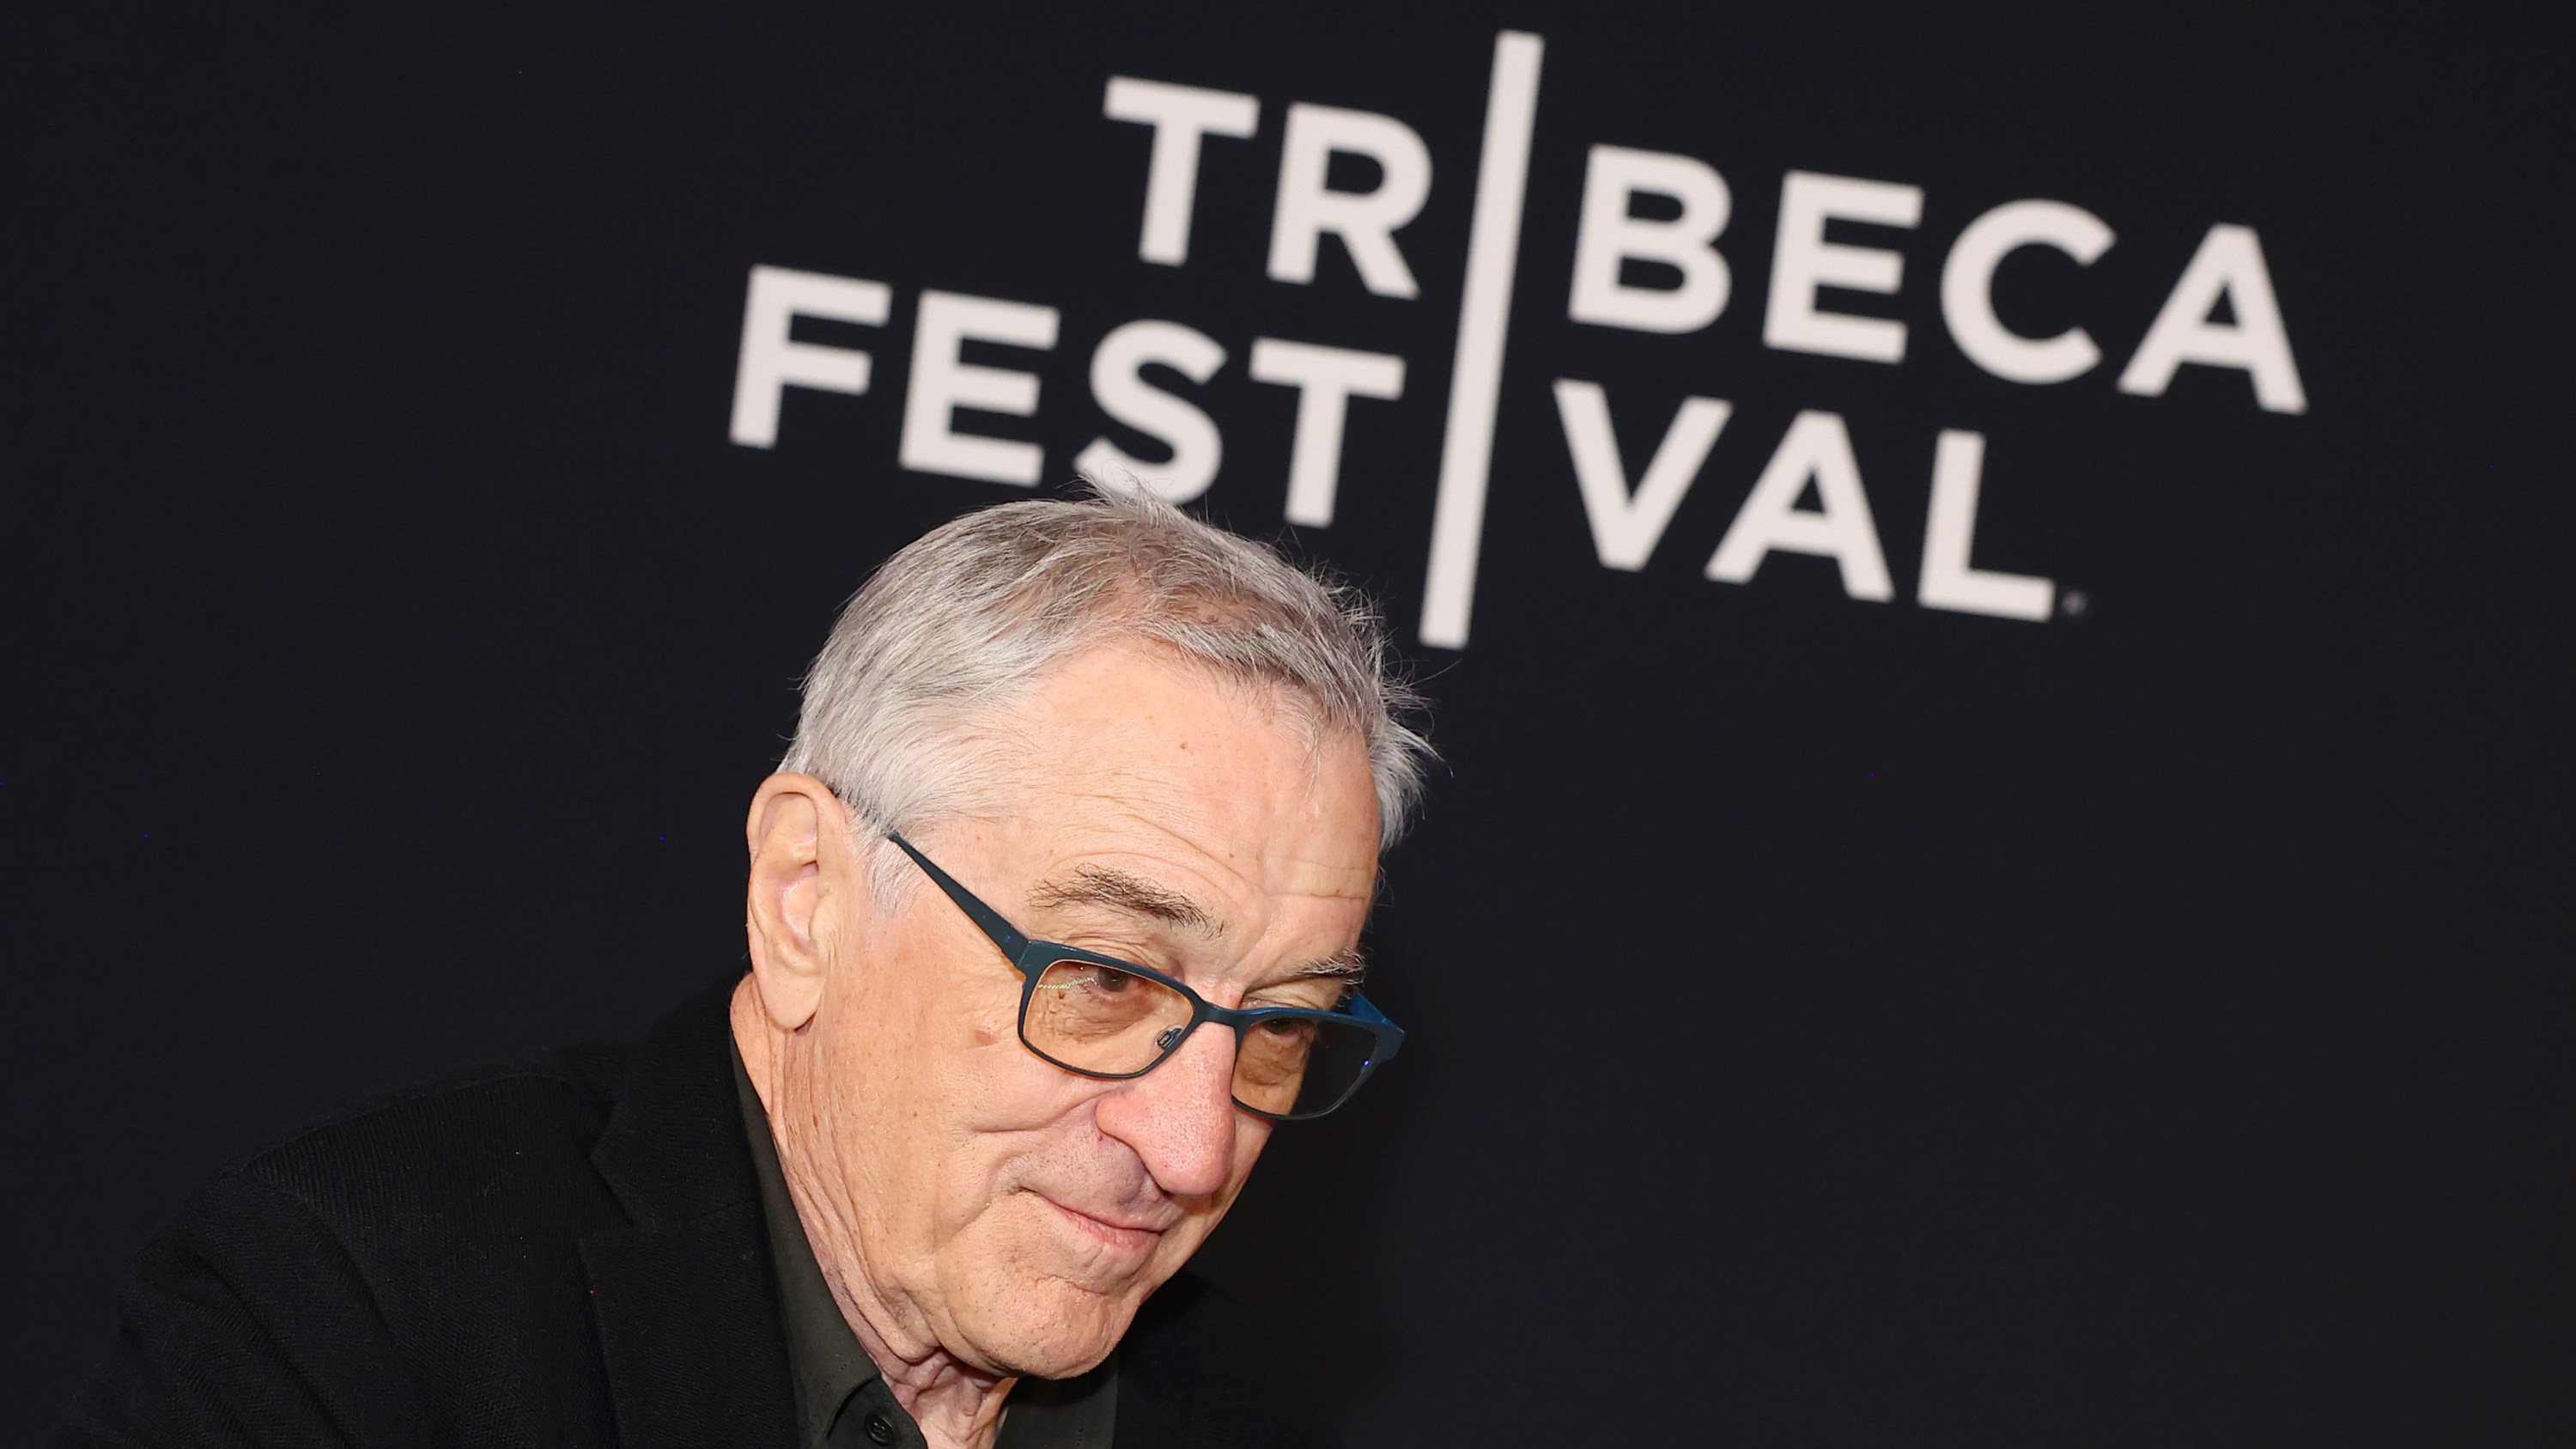 NEW YORK, NEW YORK - JUNE 07: Robert De Niro speaks onstage at the Tribeca Festival opening night reception at Tribeca Grill on June 07, 2023 in New York City. (Photo by Arturo Holmes/Getty Images for Tribeca Festival)